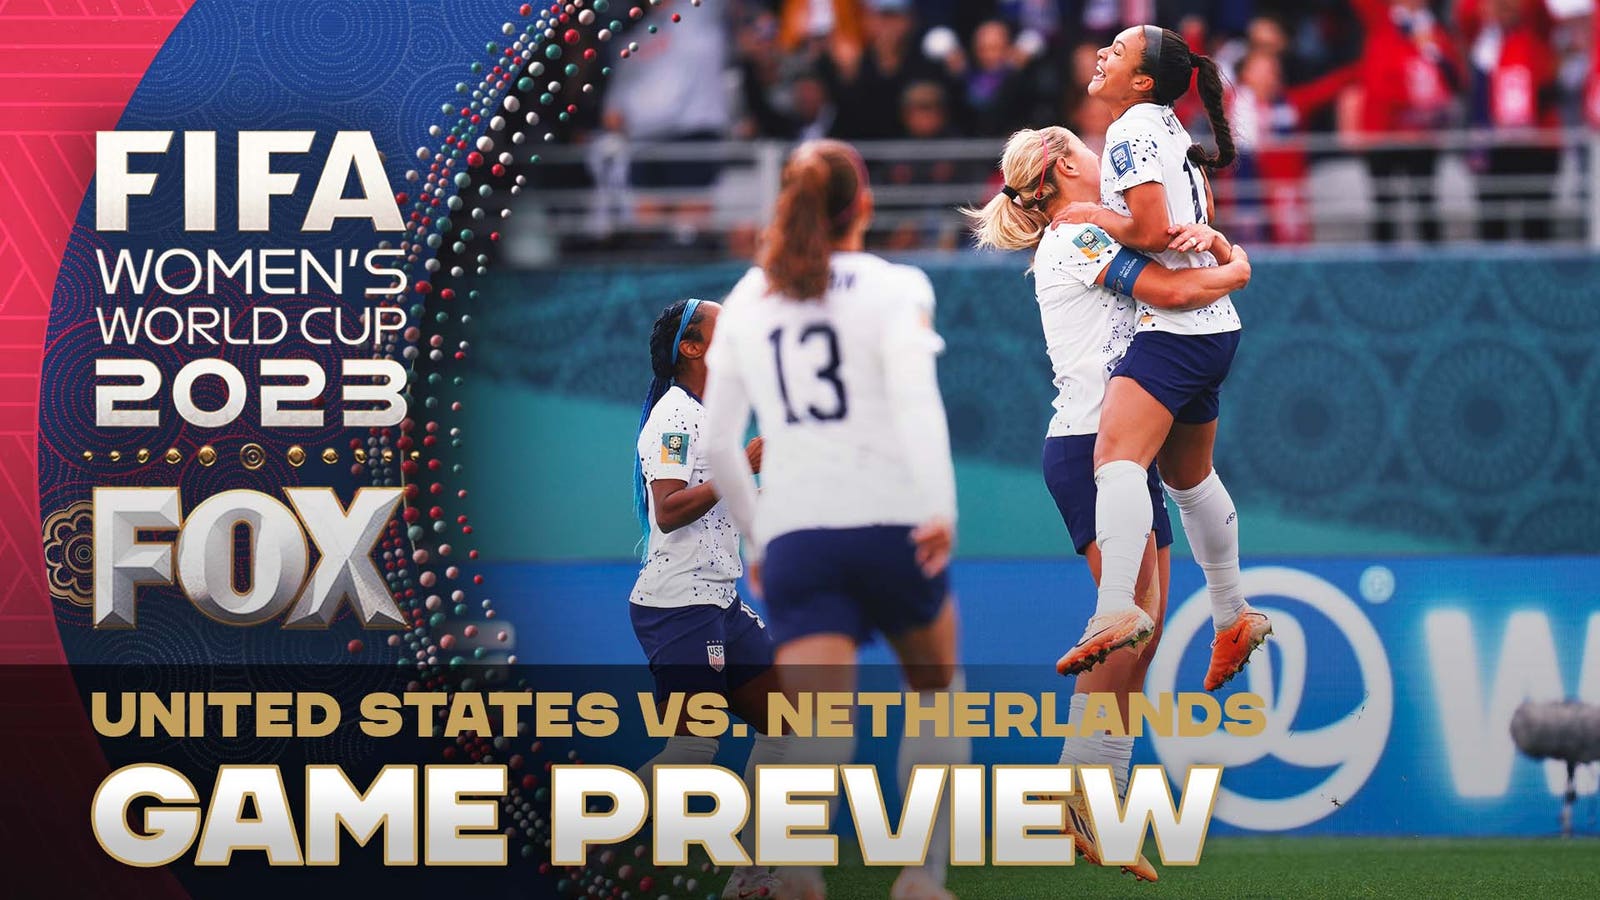 "First time the US team will be put to the test defensively" — Ari Hingst on the Netherlands game